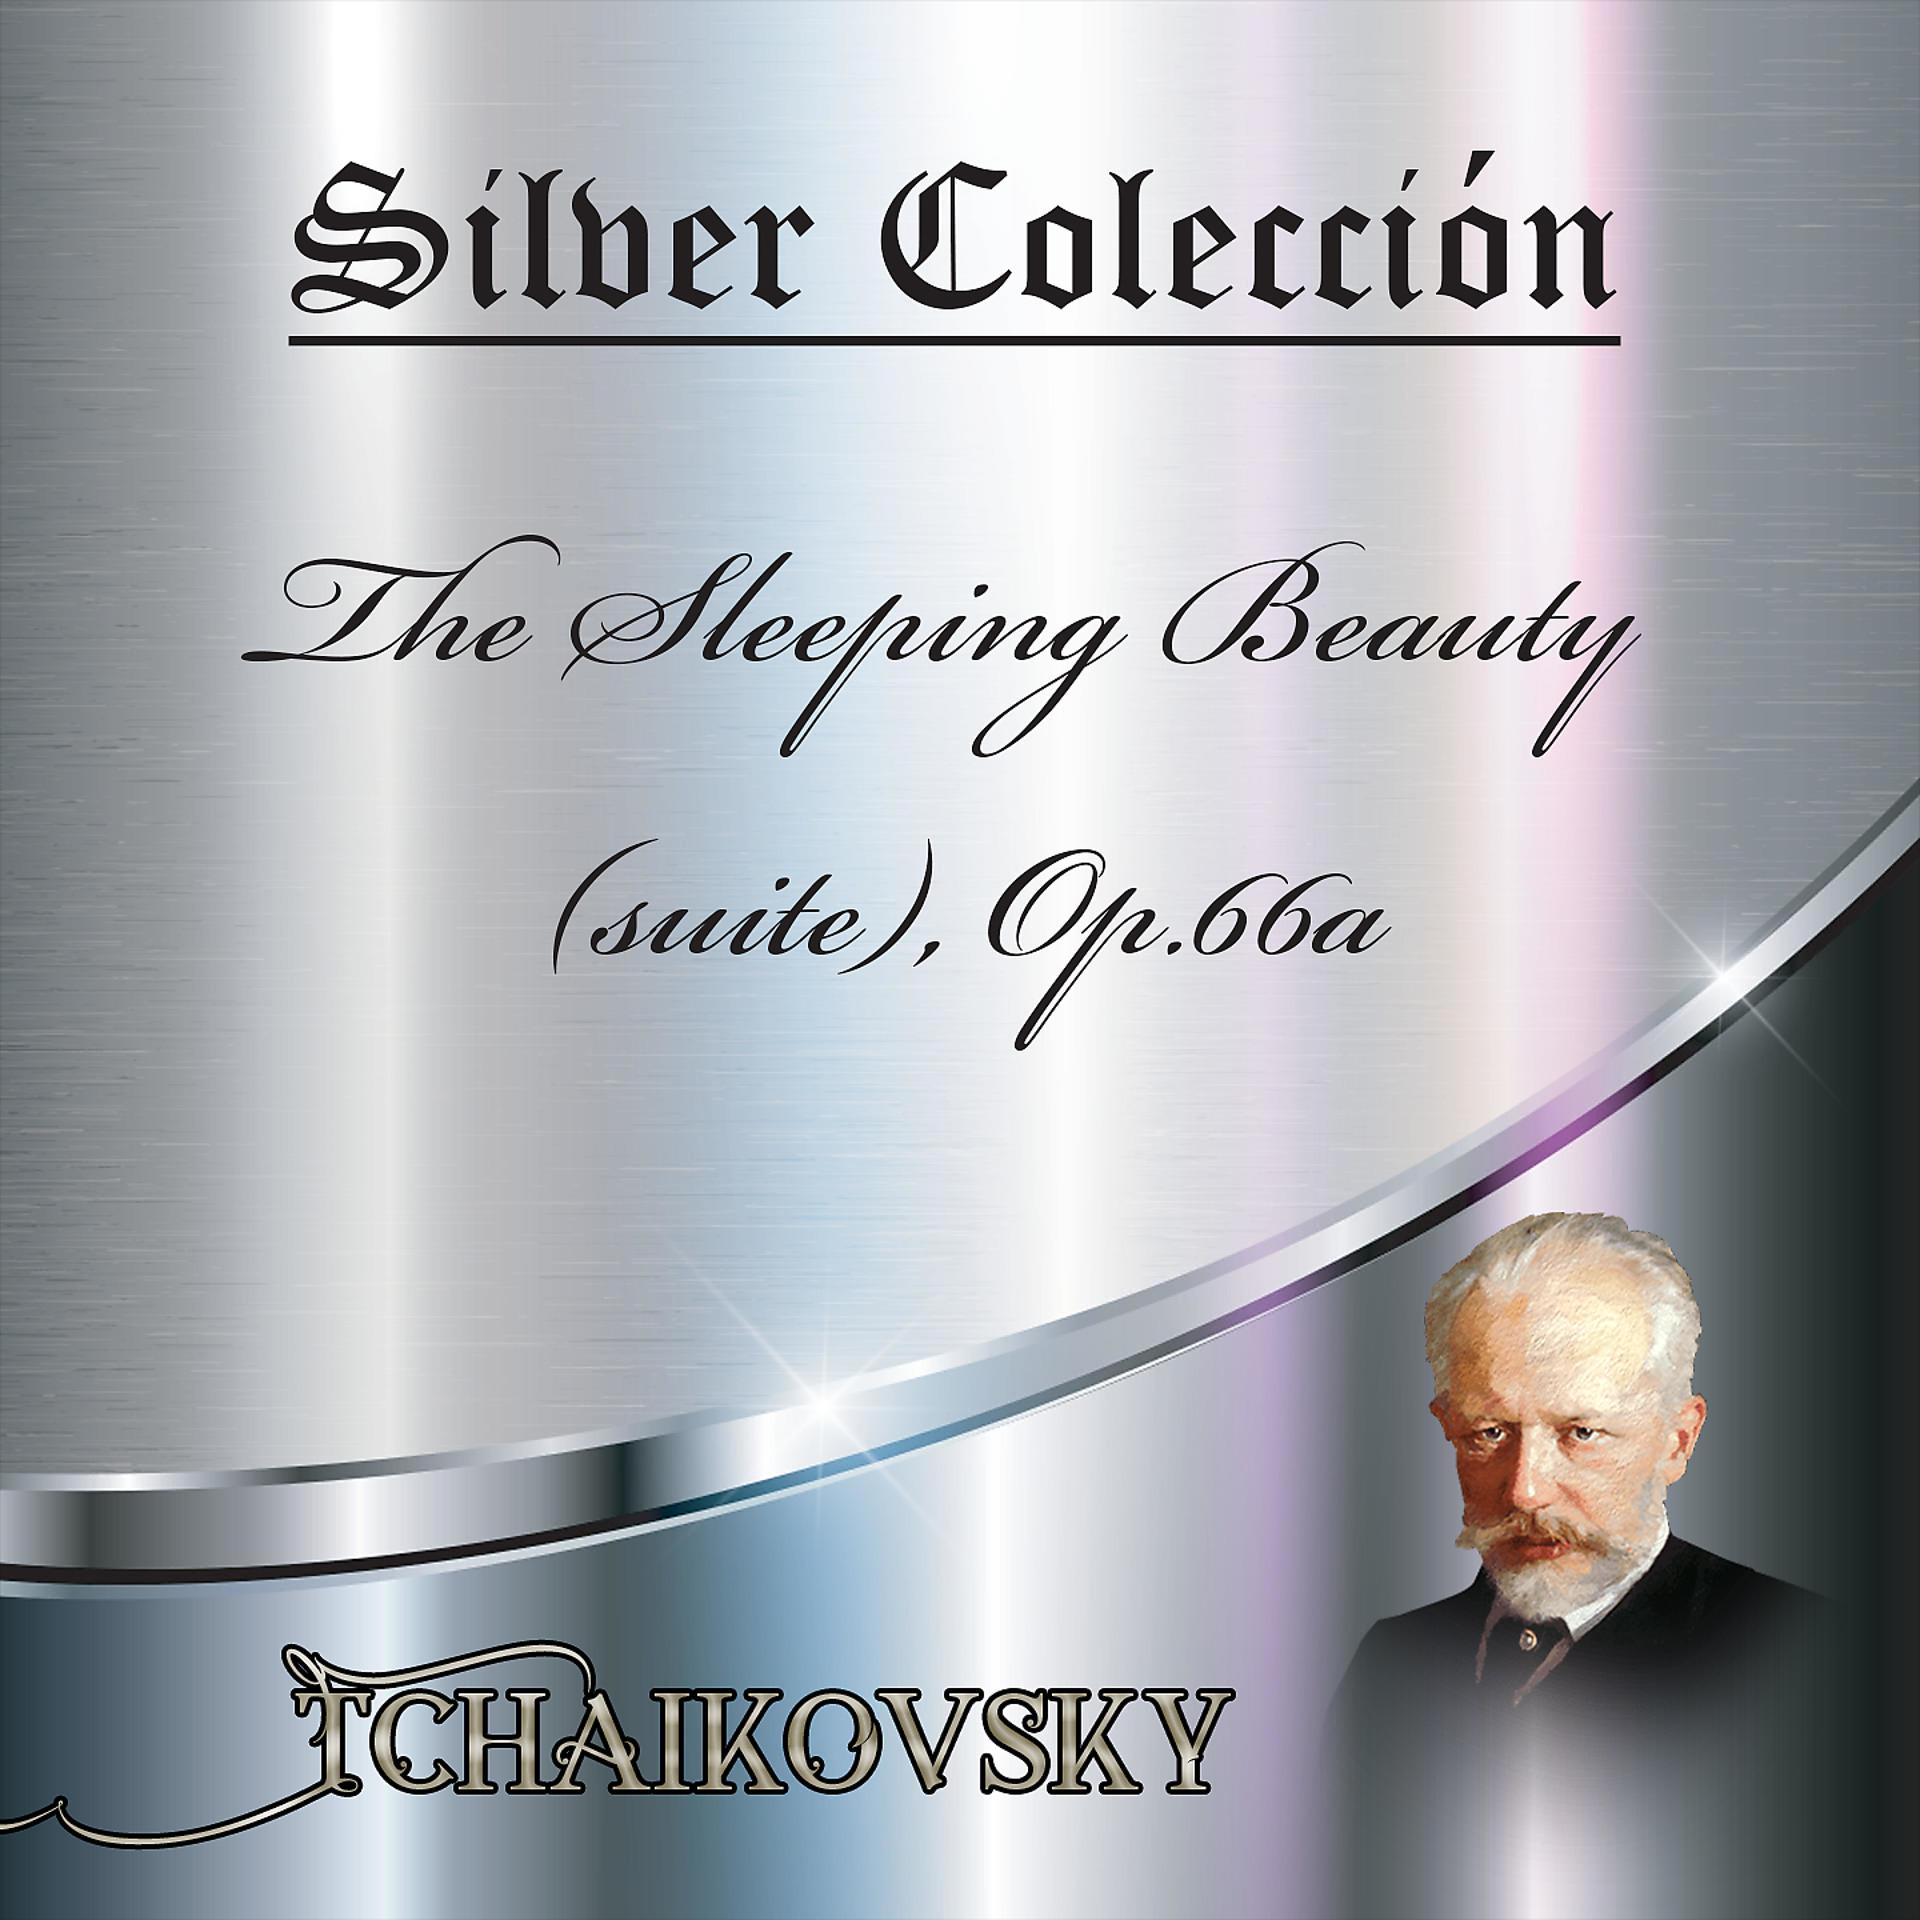 Постер альбома Silver Colección, Tchaikovsky - The Sleeping Beauty (Suite), Op.66A